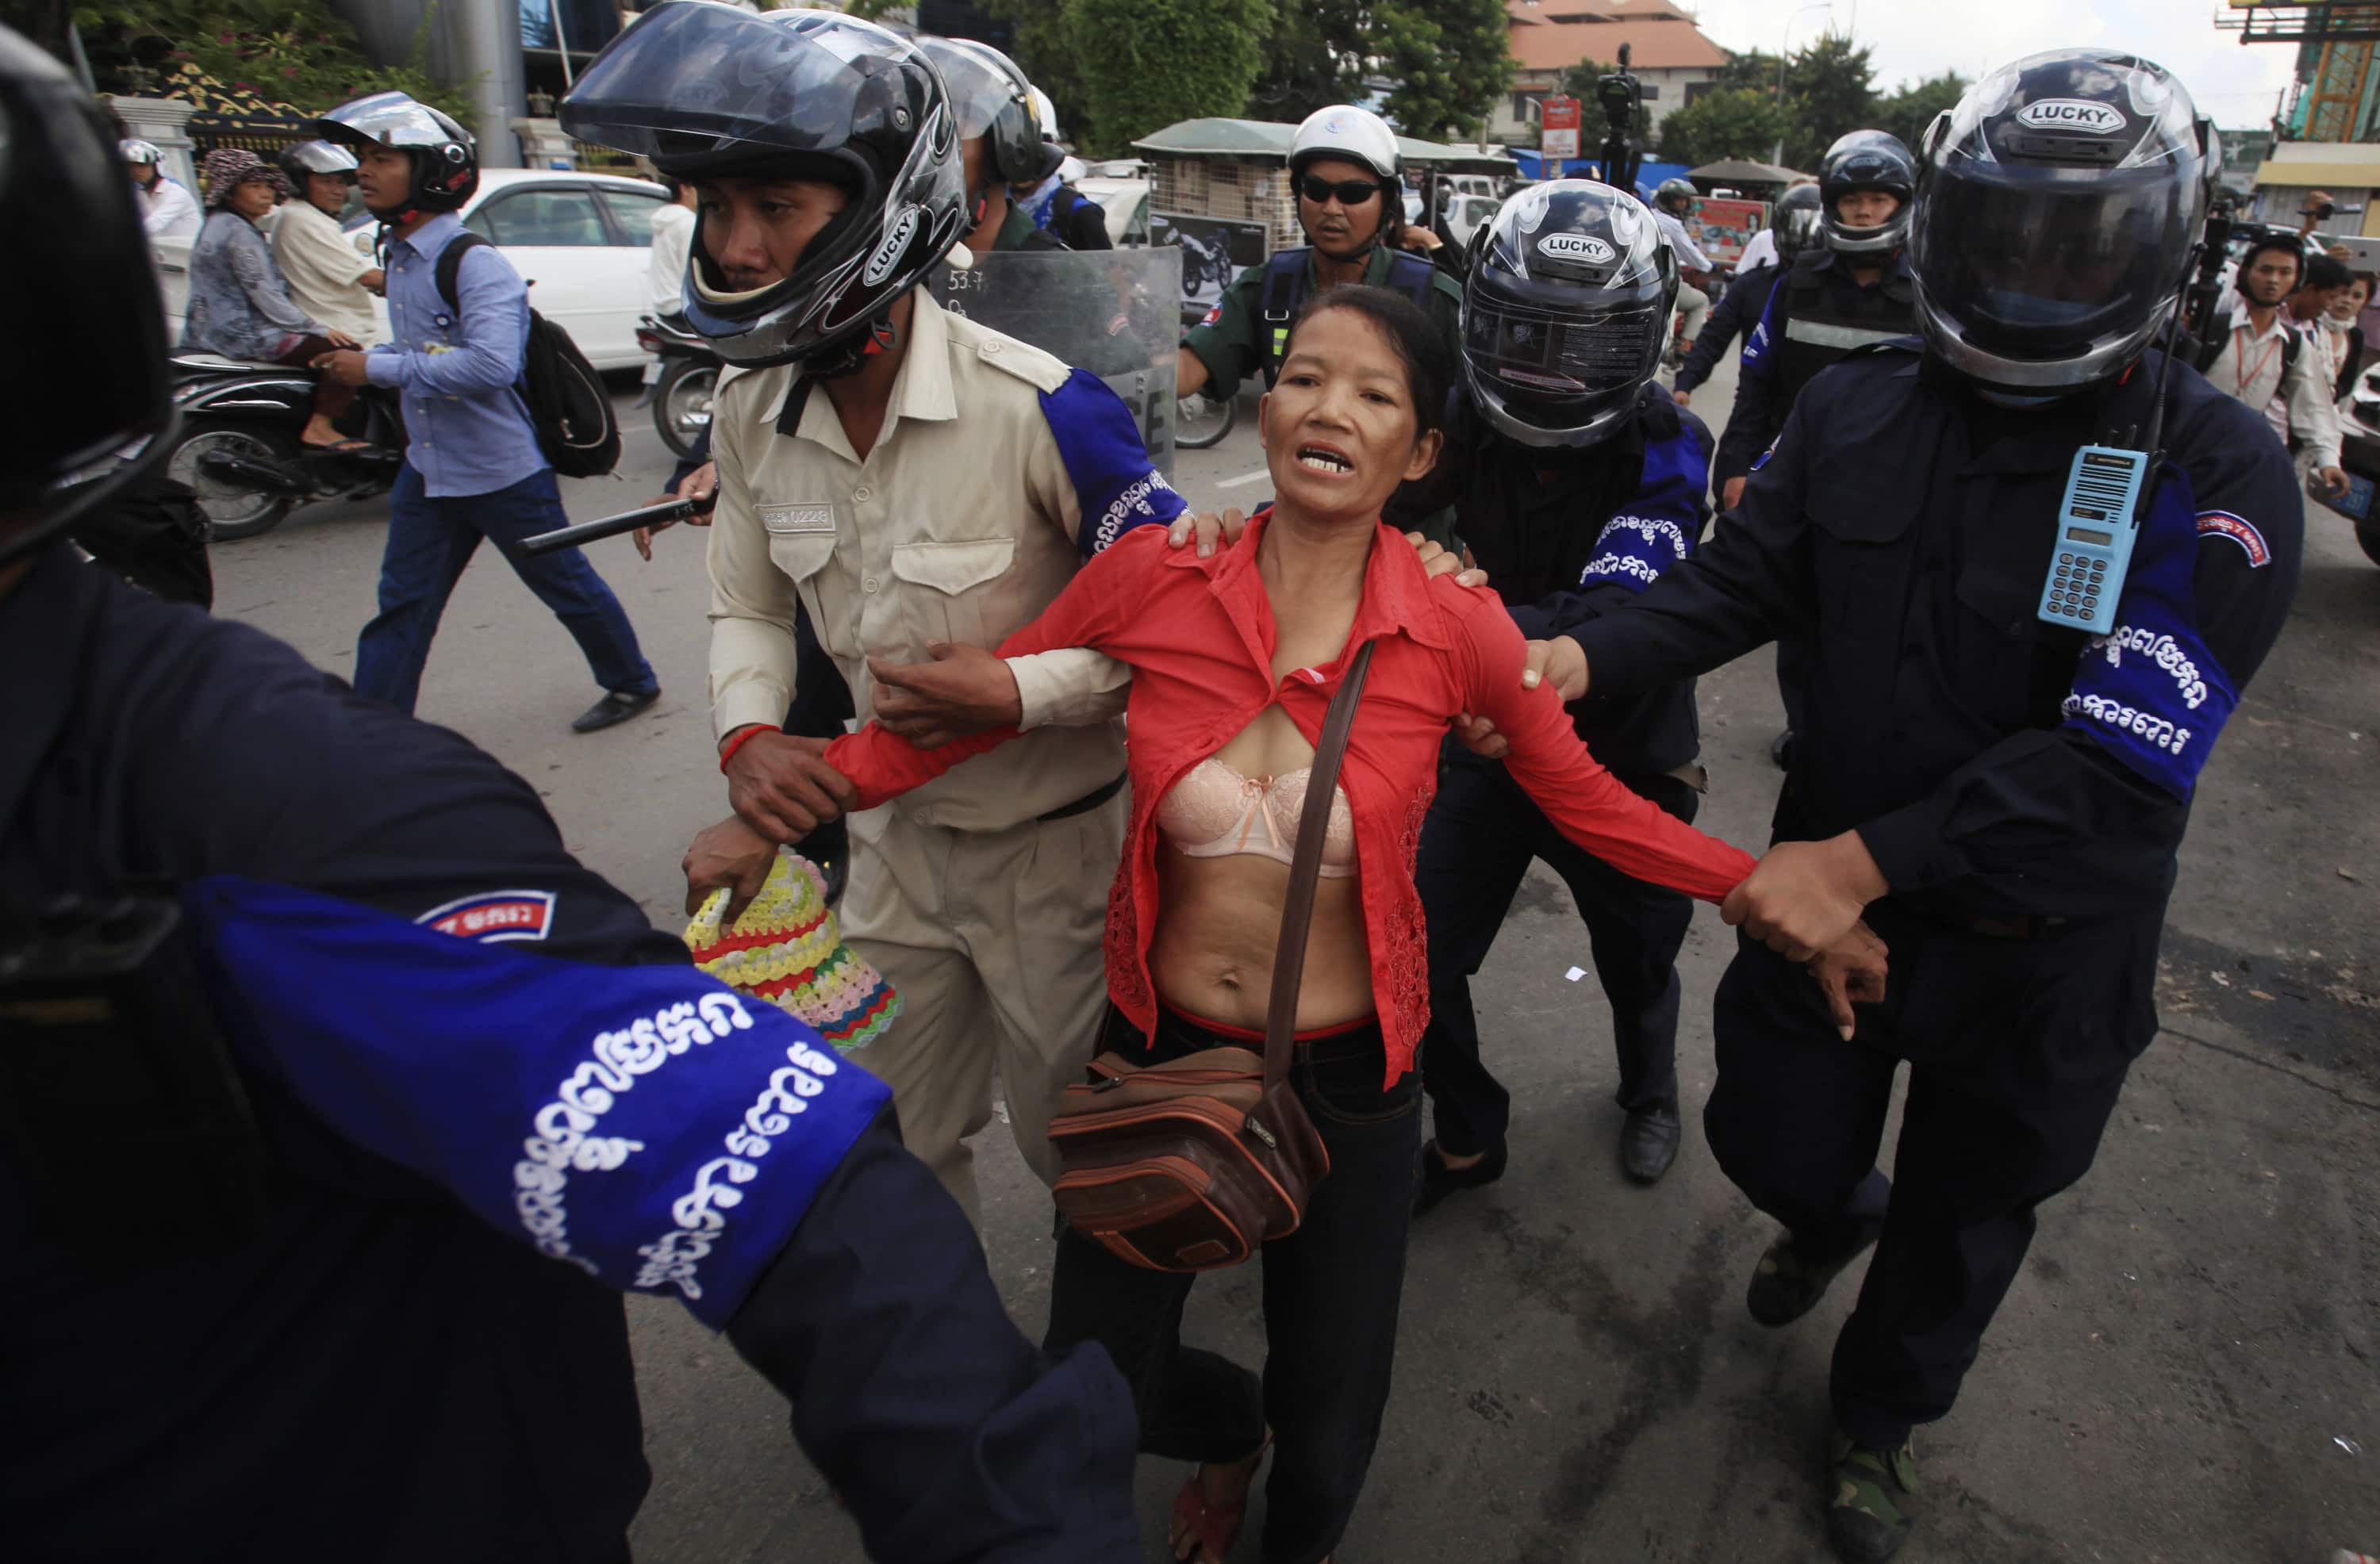 A protester is detained by police during a protest calling for the release of seven detained protesters, in front of the Phnom Penh Municipal Court, 11 November 2014, REUTERS/Samrang Pring